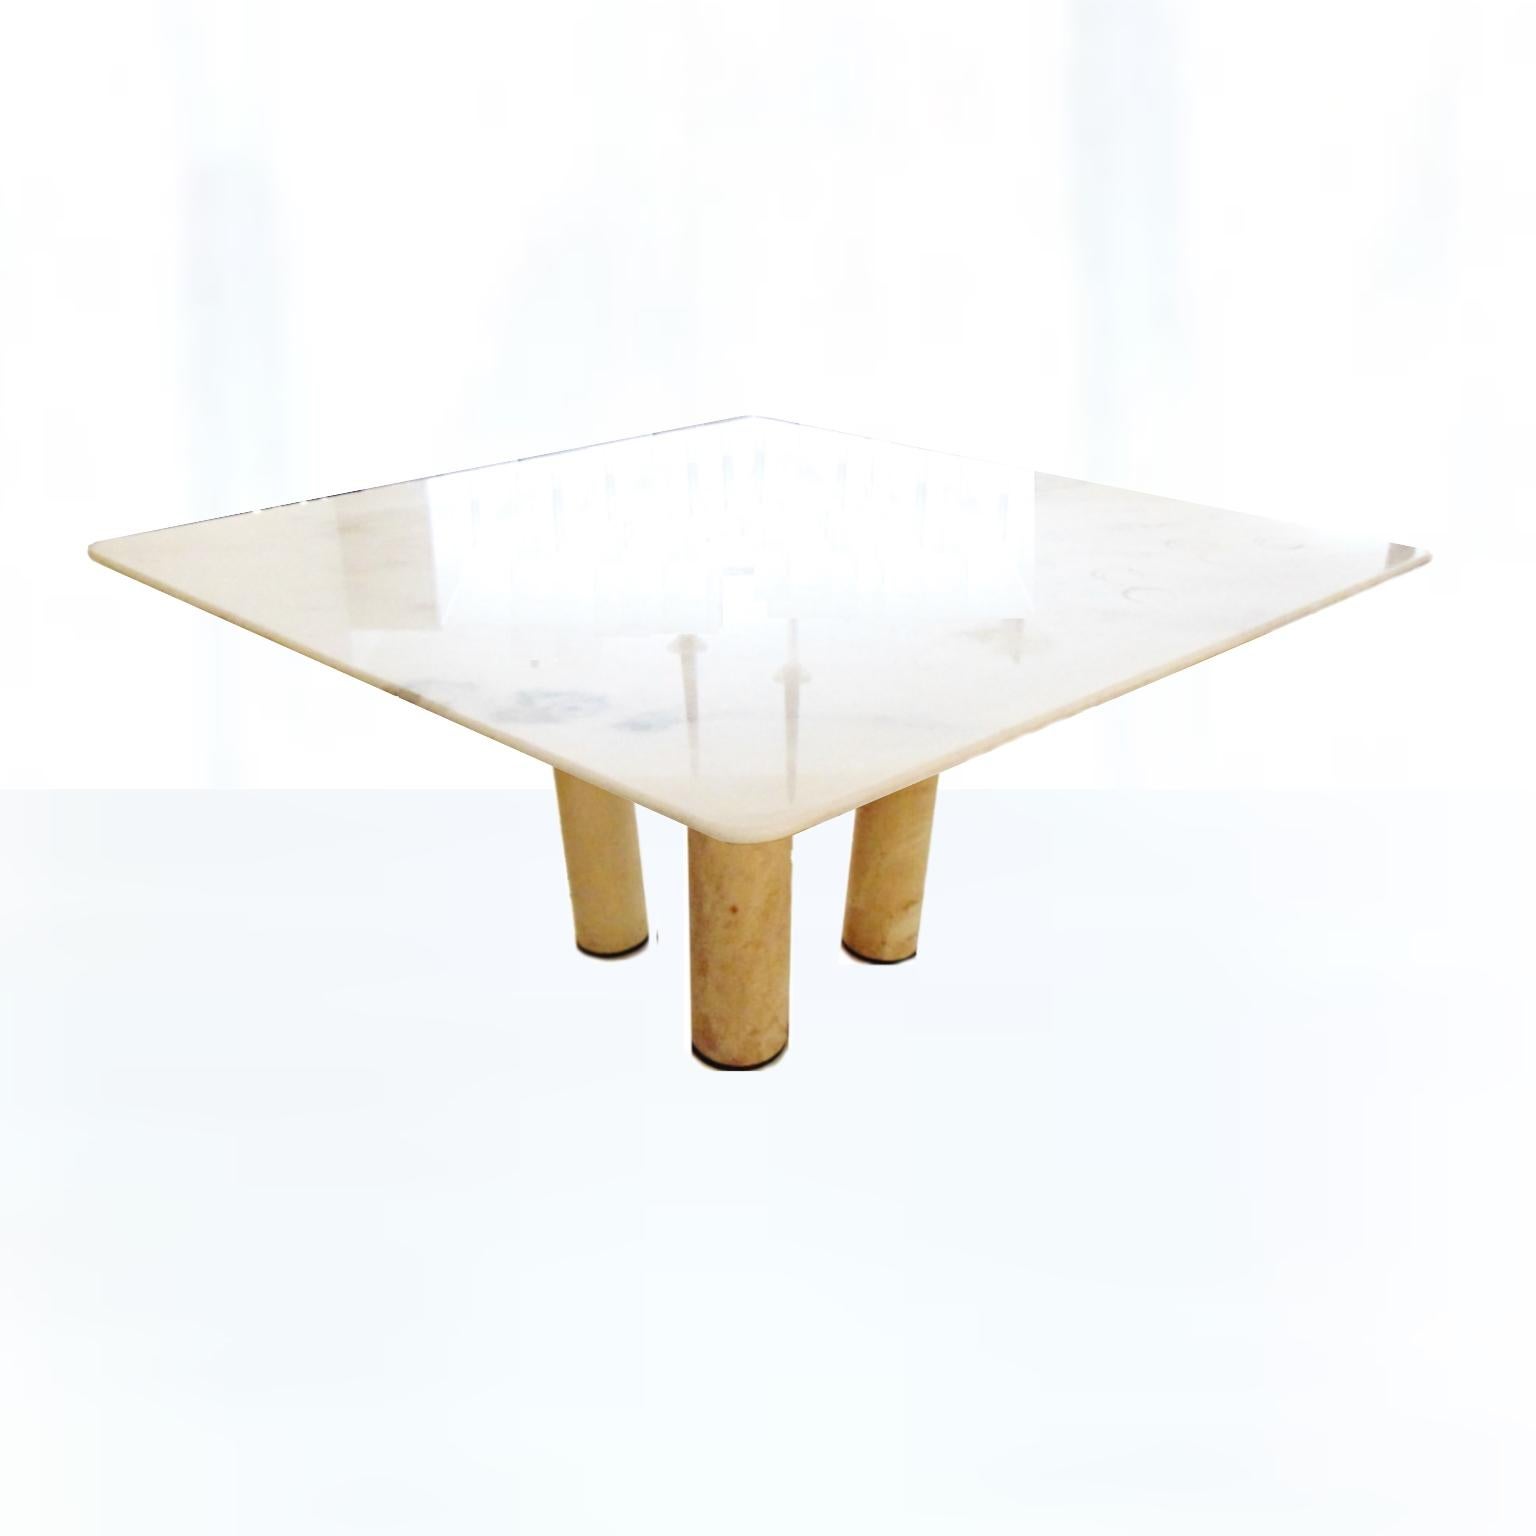 Italian Large Square Dining Table White Marble and Travertine, Sormani, Italy, 1981